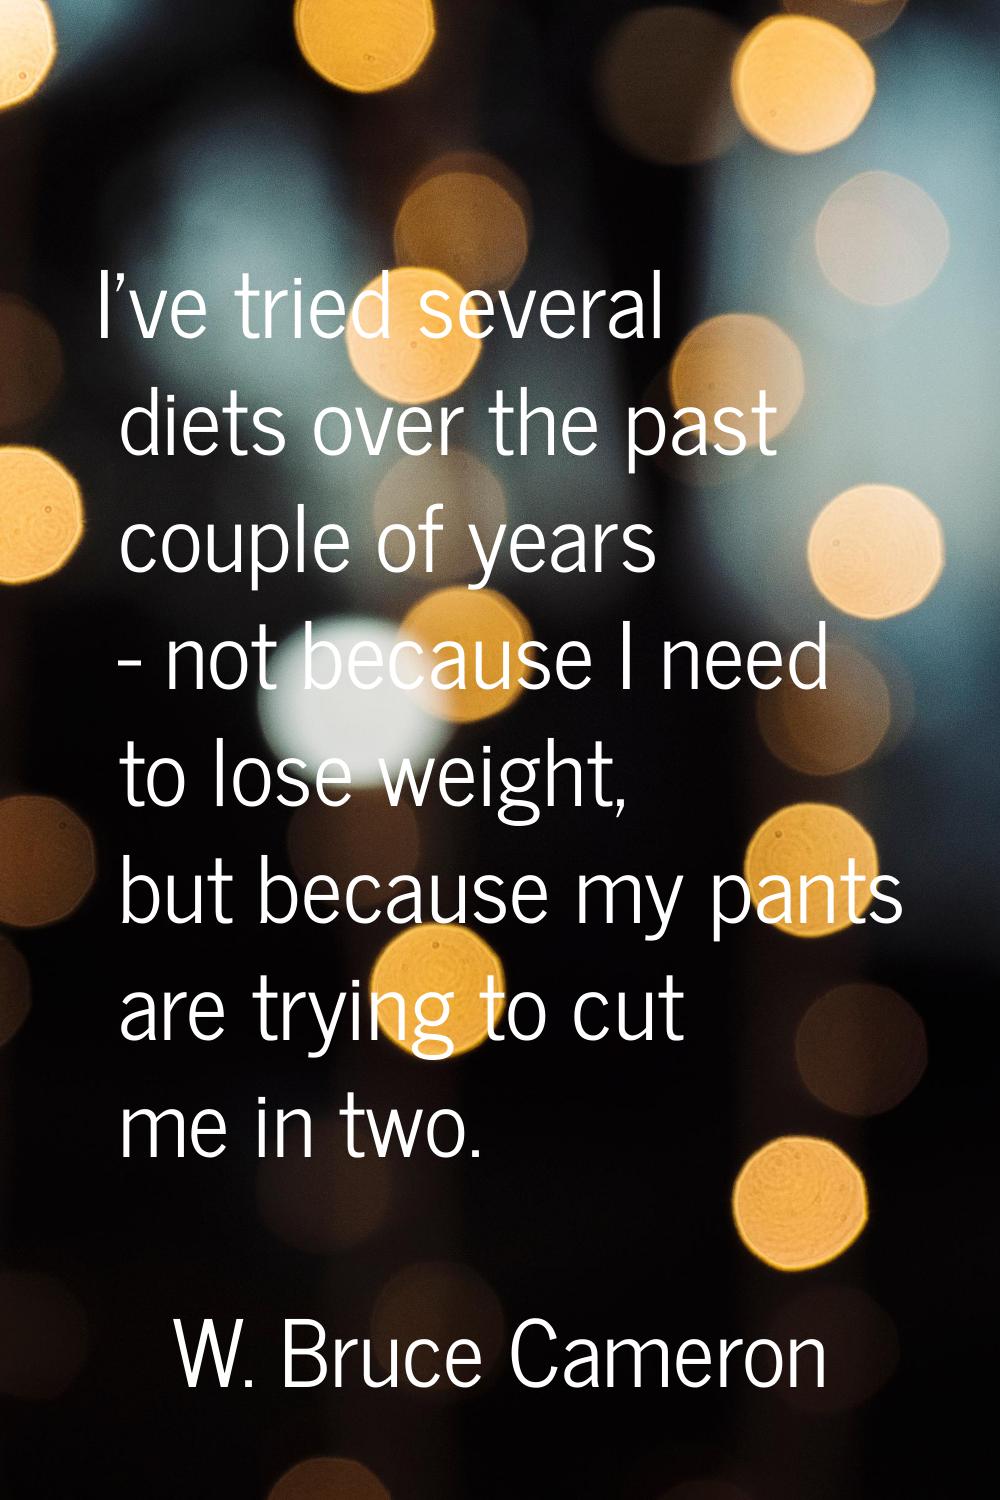 I've tried several diets over the past couple of years - not because I need to lose weight, but bec